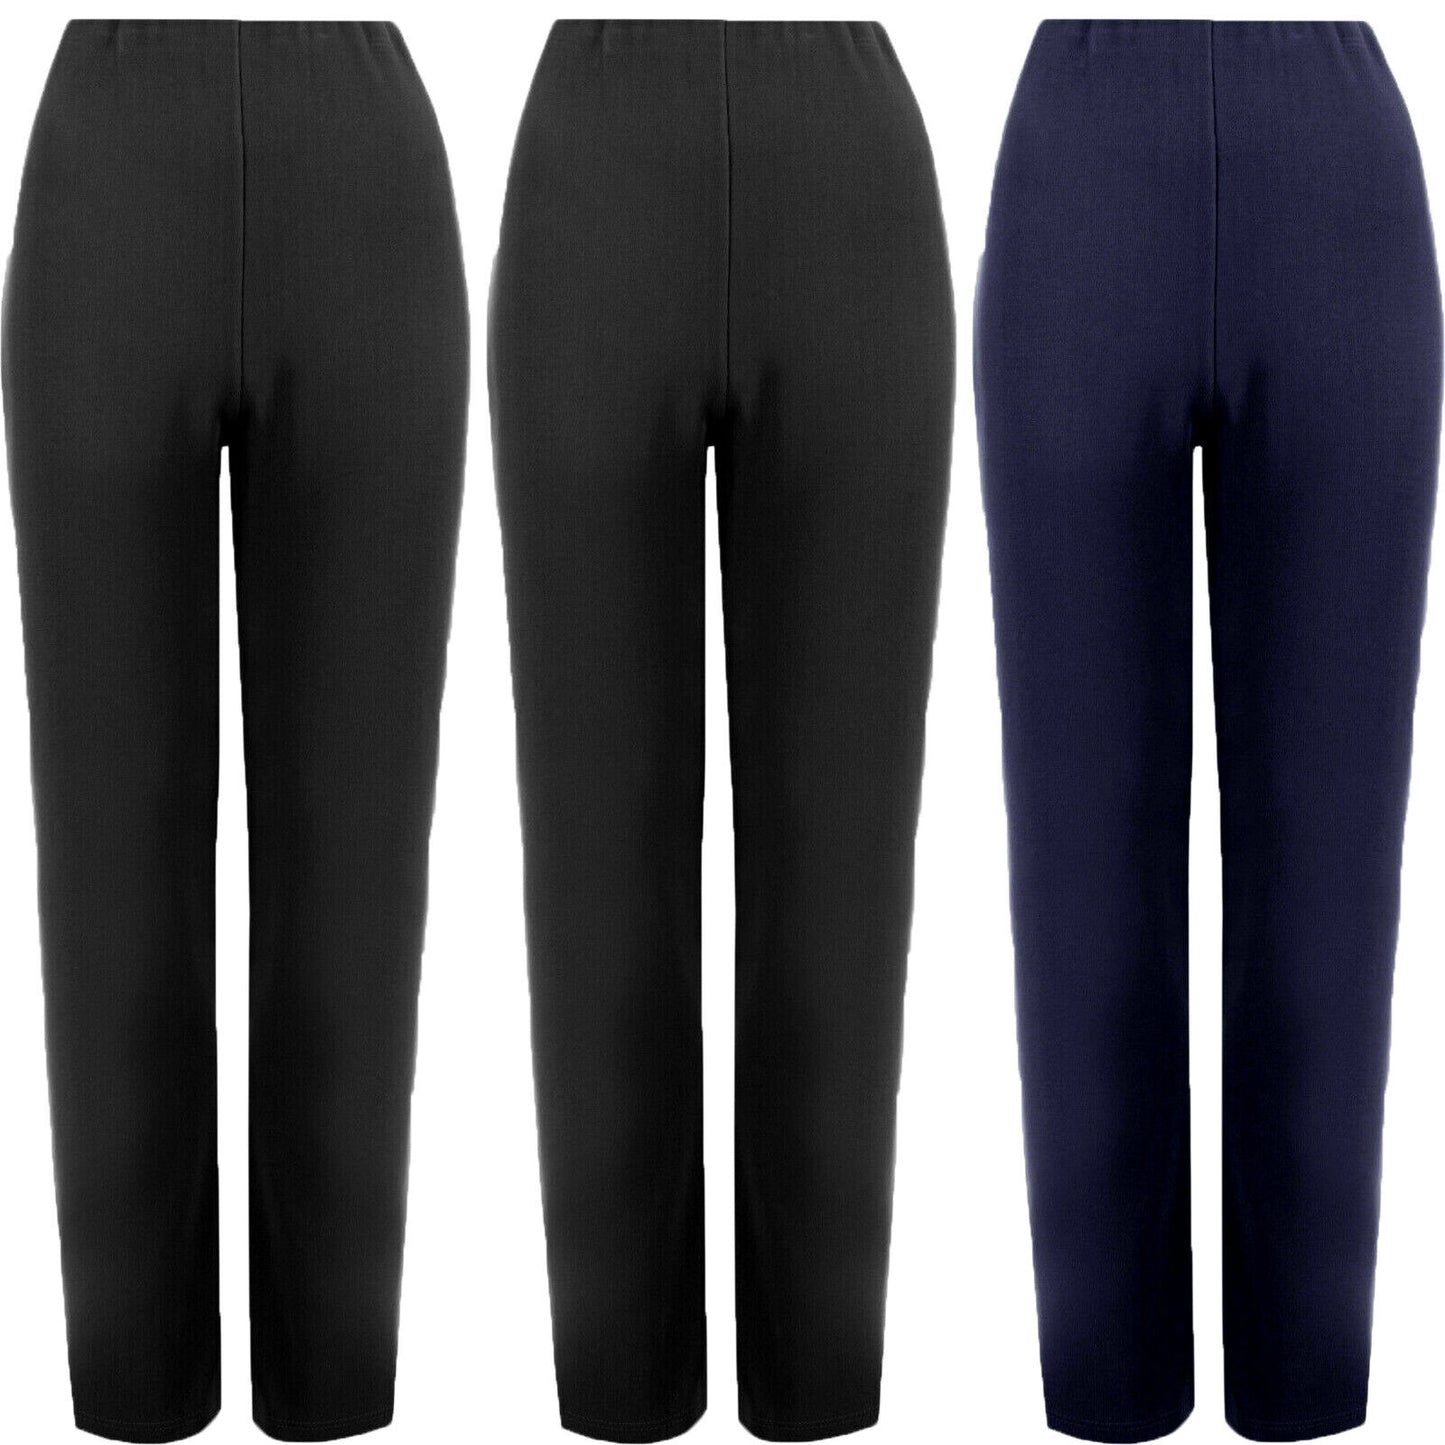 3 PACK WOMENS STRAIGHT LEG TROUSERS LADIES STRETCH PANTS PULL ON BOTTOMS